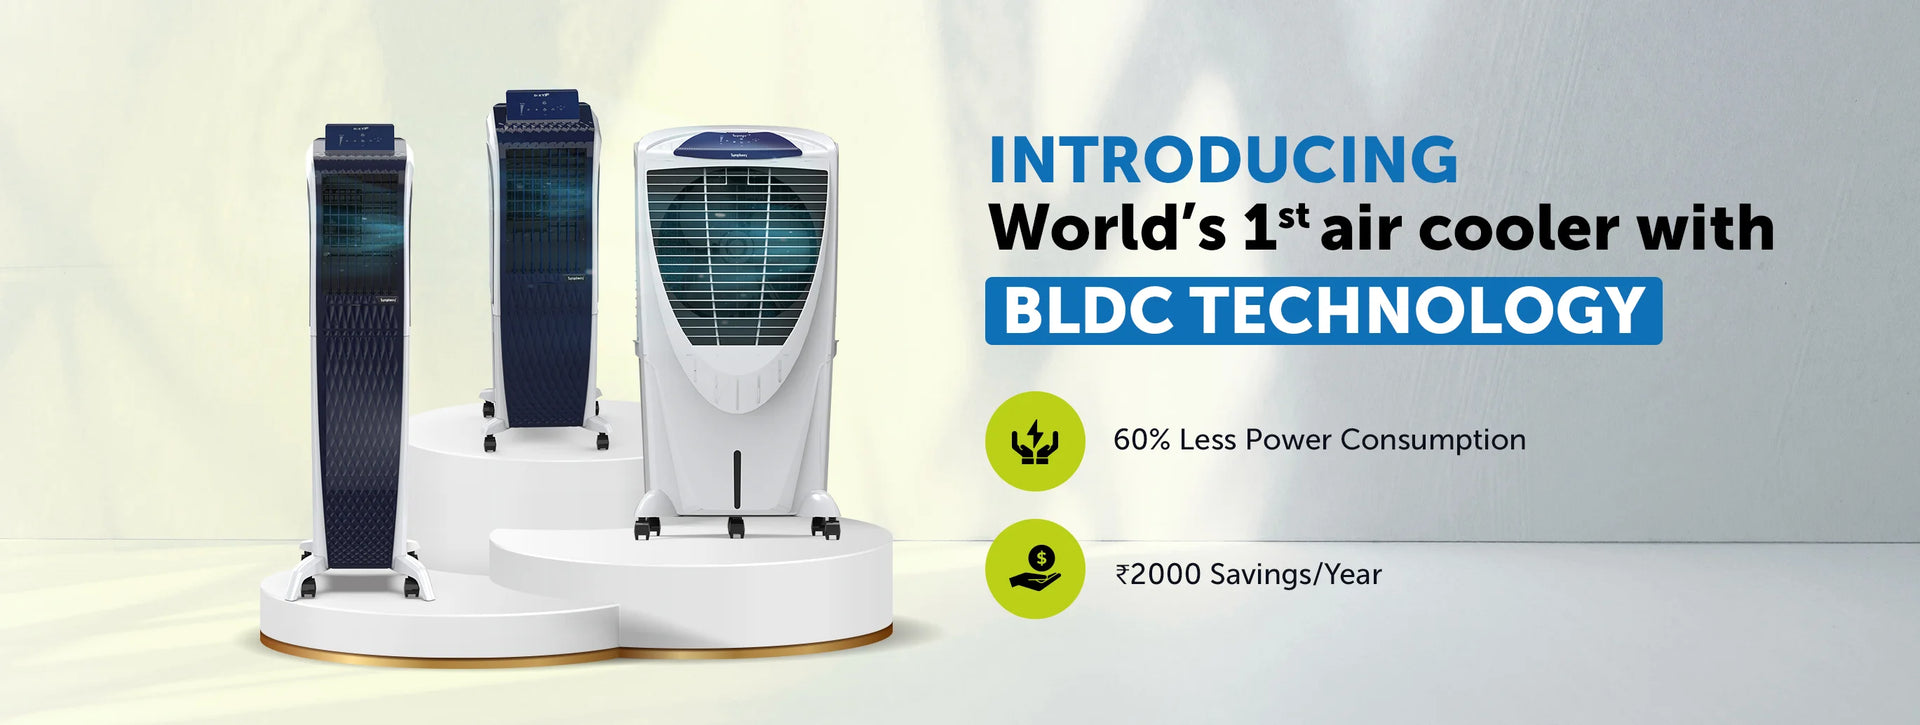 Symphony Air Cooler with BLDC Technology 